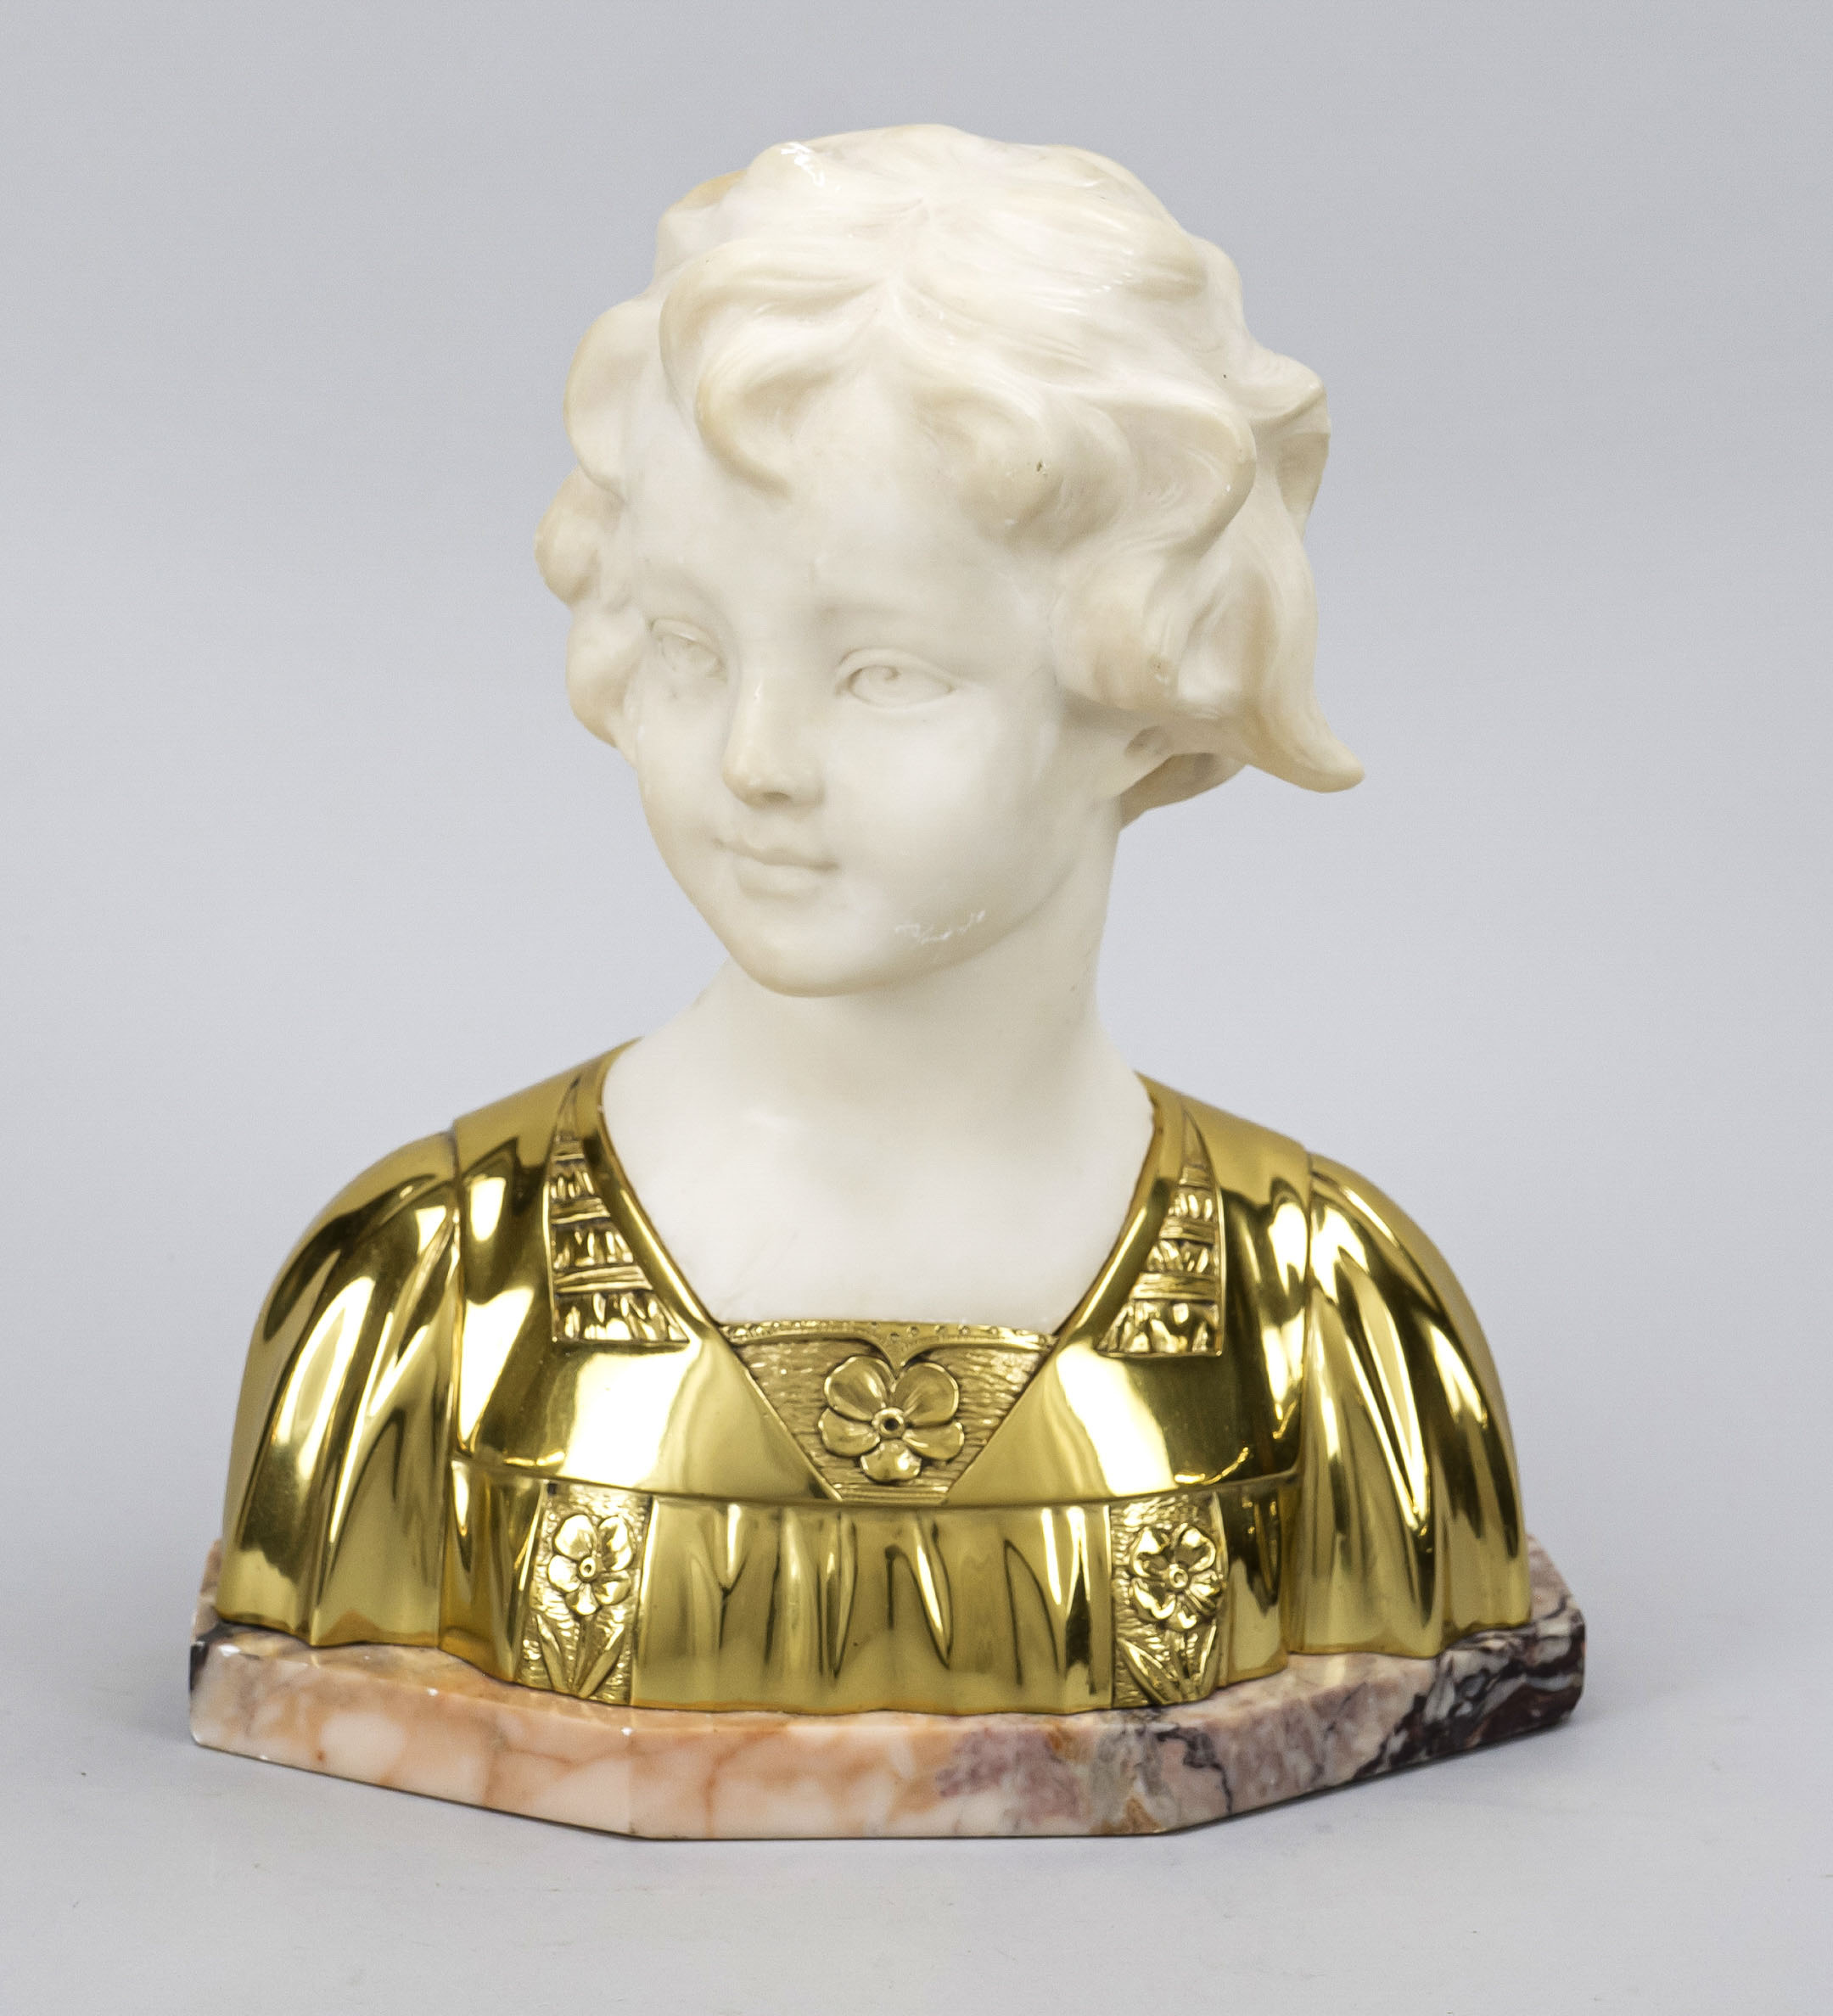 signed Cecchelli, ital. Sculptor c. 1910, bust of a girl, polished bronze and alabaster over